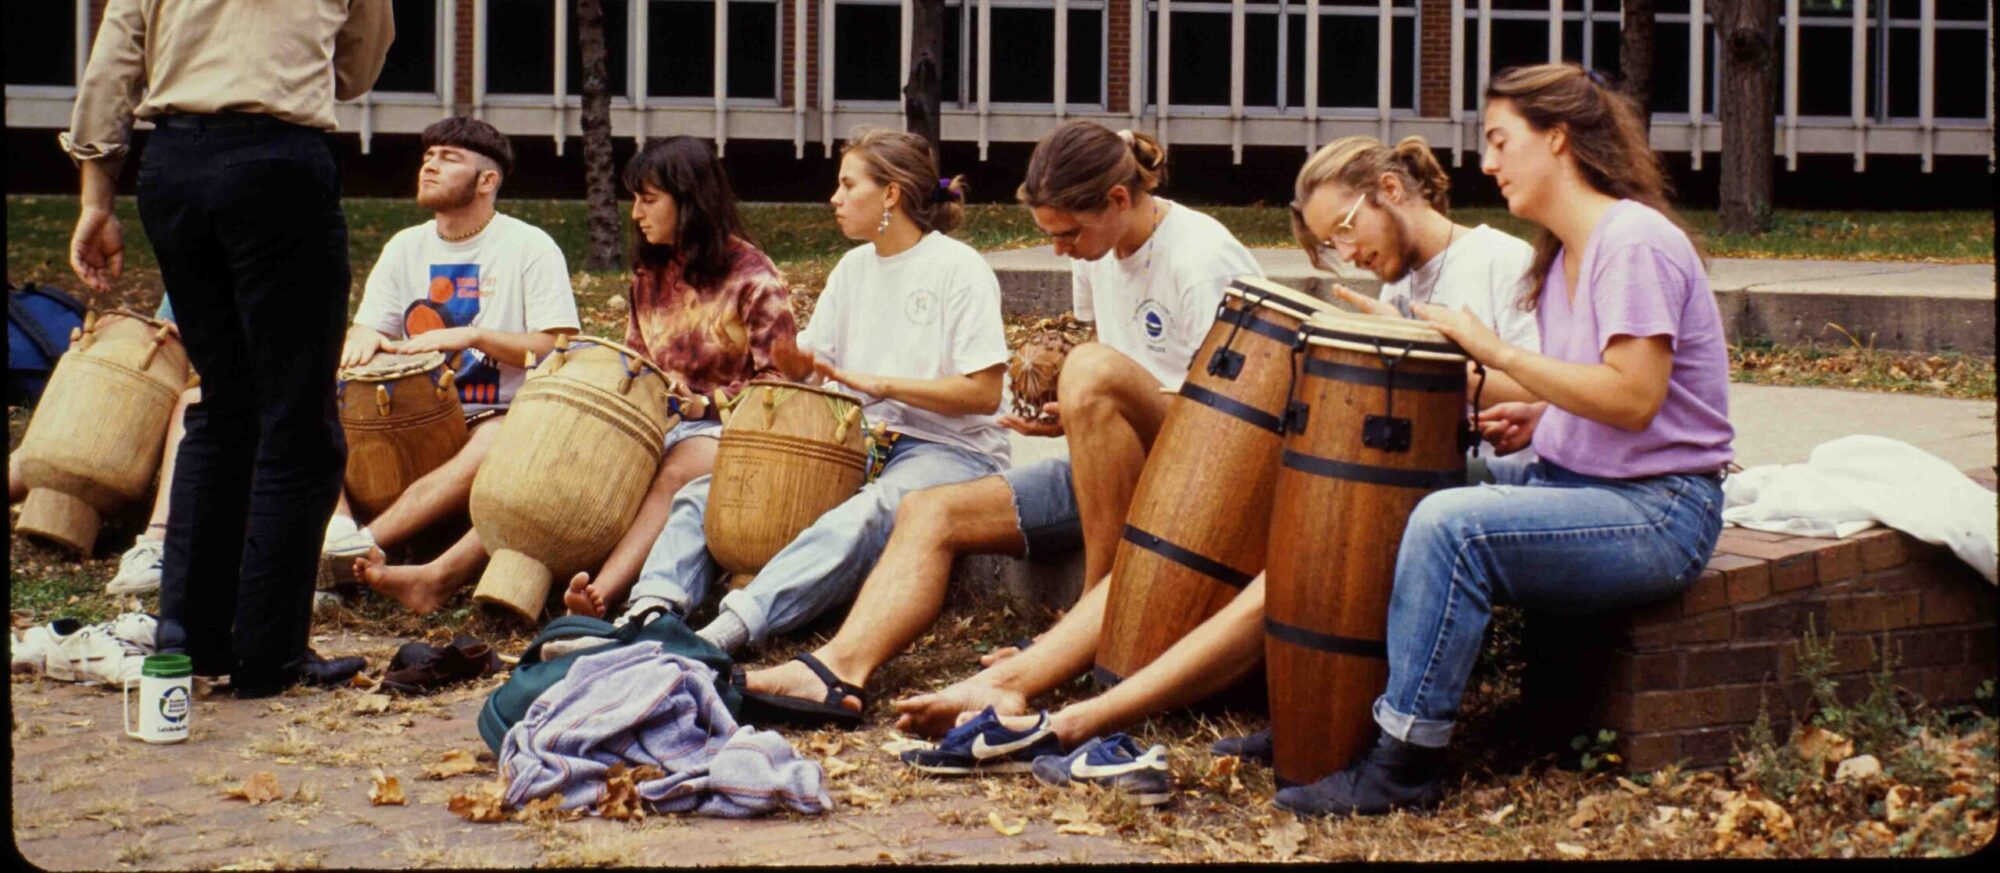 Surrounded by their jackets and shoes, seven students sit in front of a brick building and play bongo drums. Part of the photograph is blocked by a standing individual.